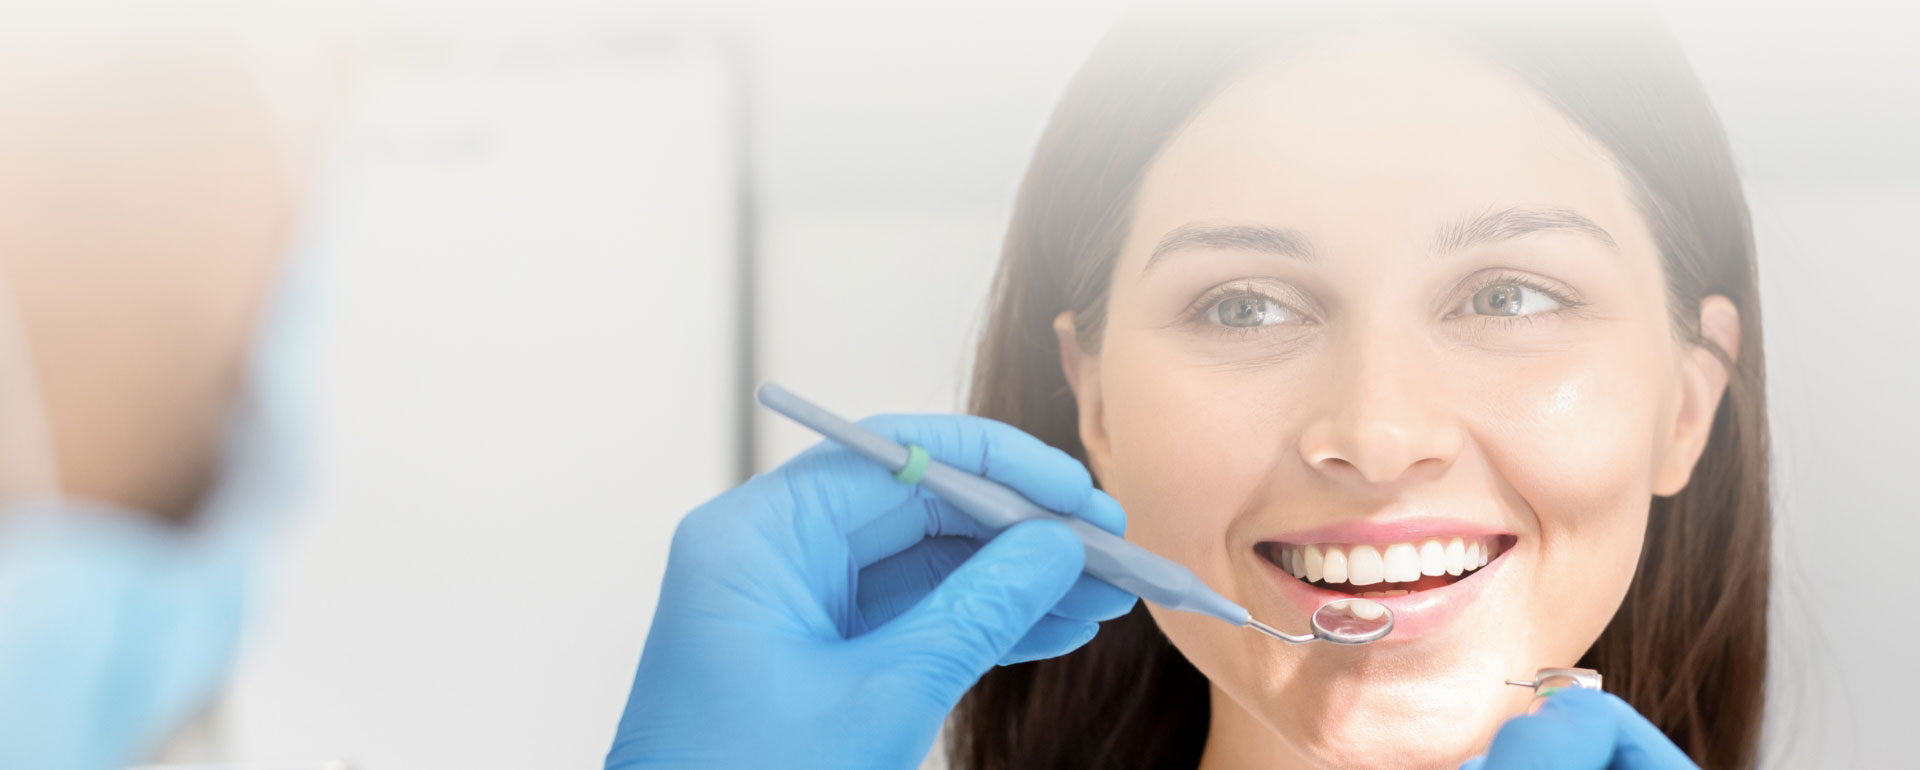 ABOUT Family and Cosmetic Dentistry